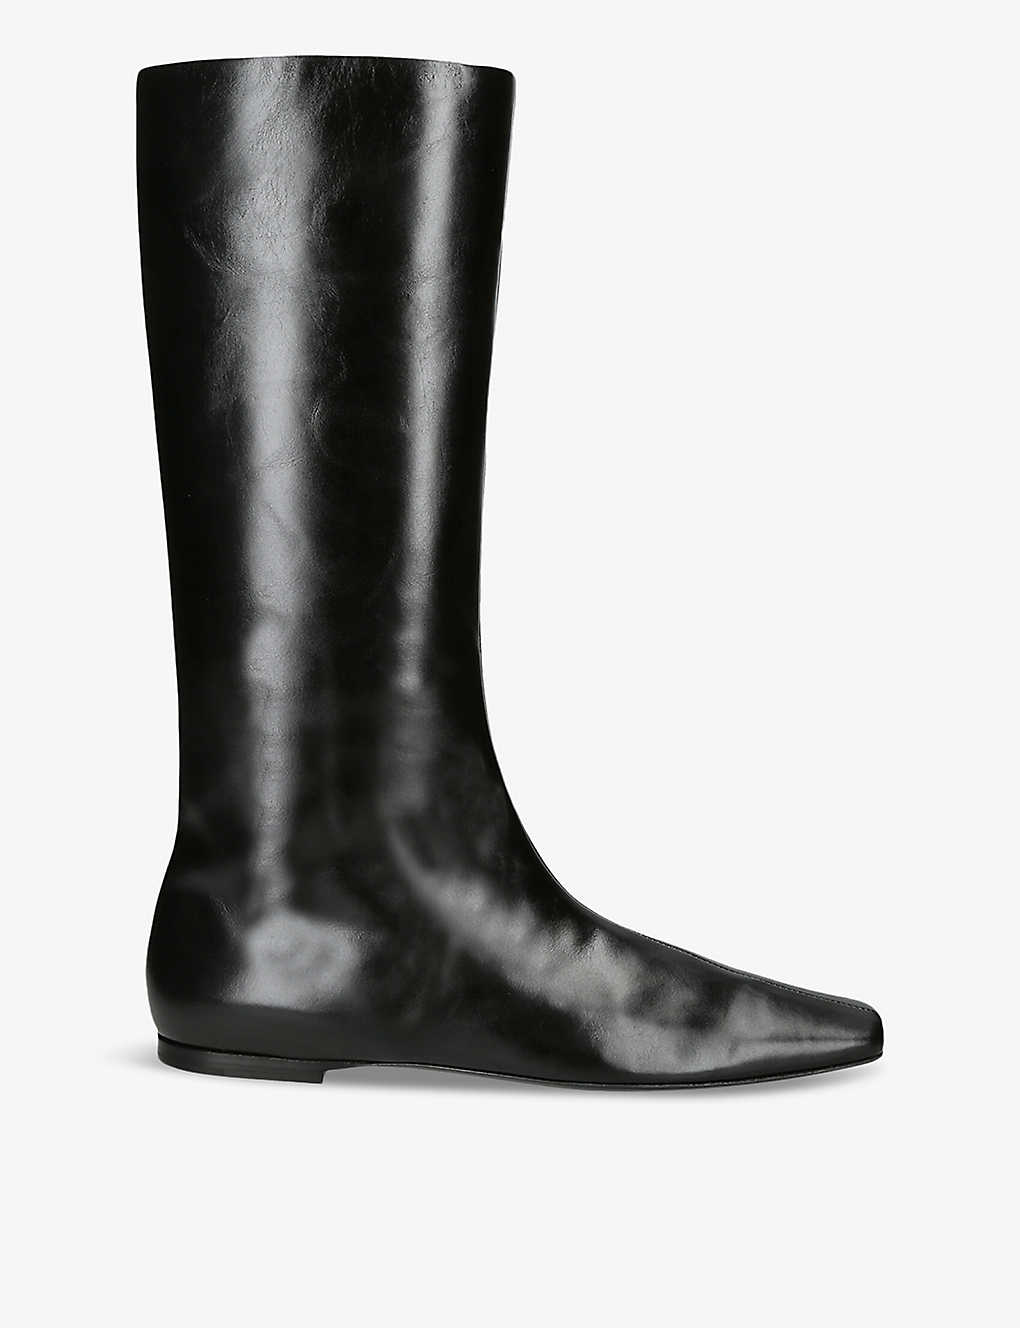 Shop The Row Women's Black Bette Square-toe Leather Knee-high Boots